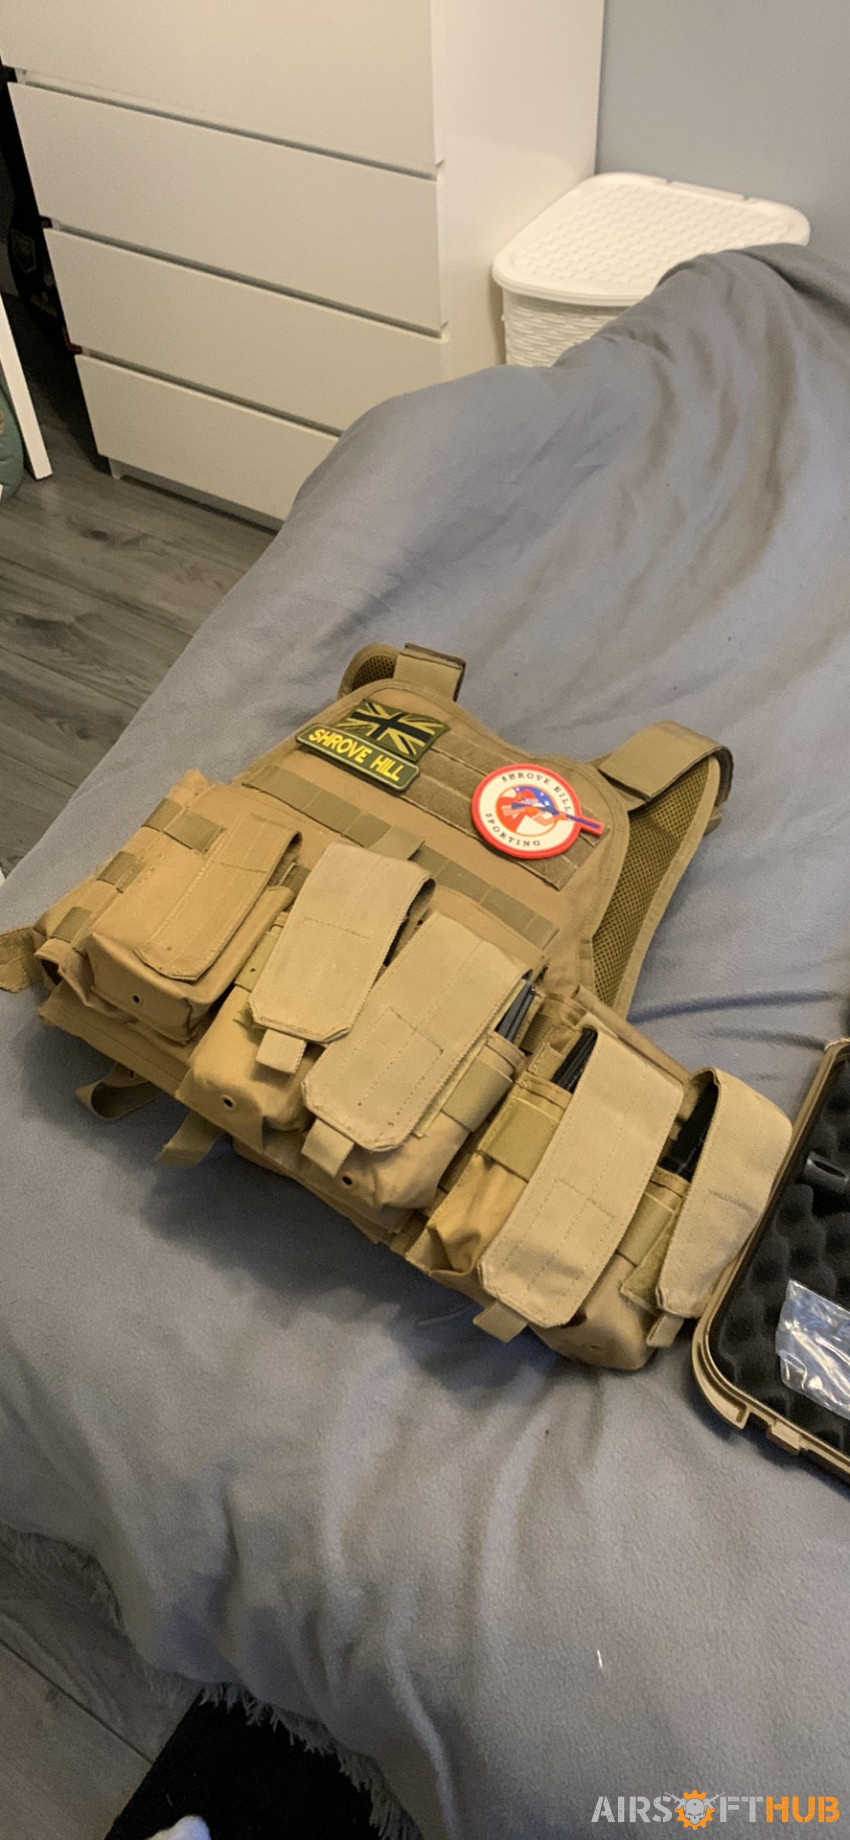 Rifle and gear bundle - Used airsoft equipment